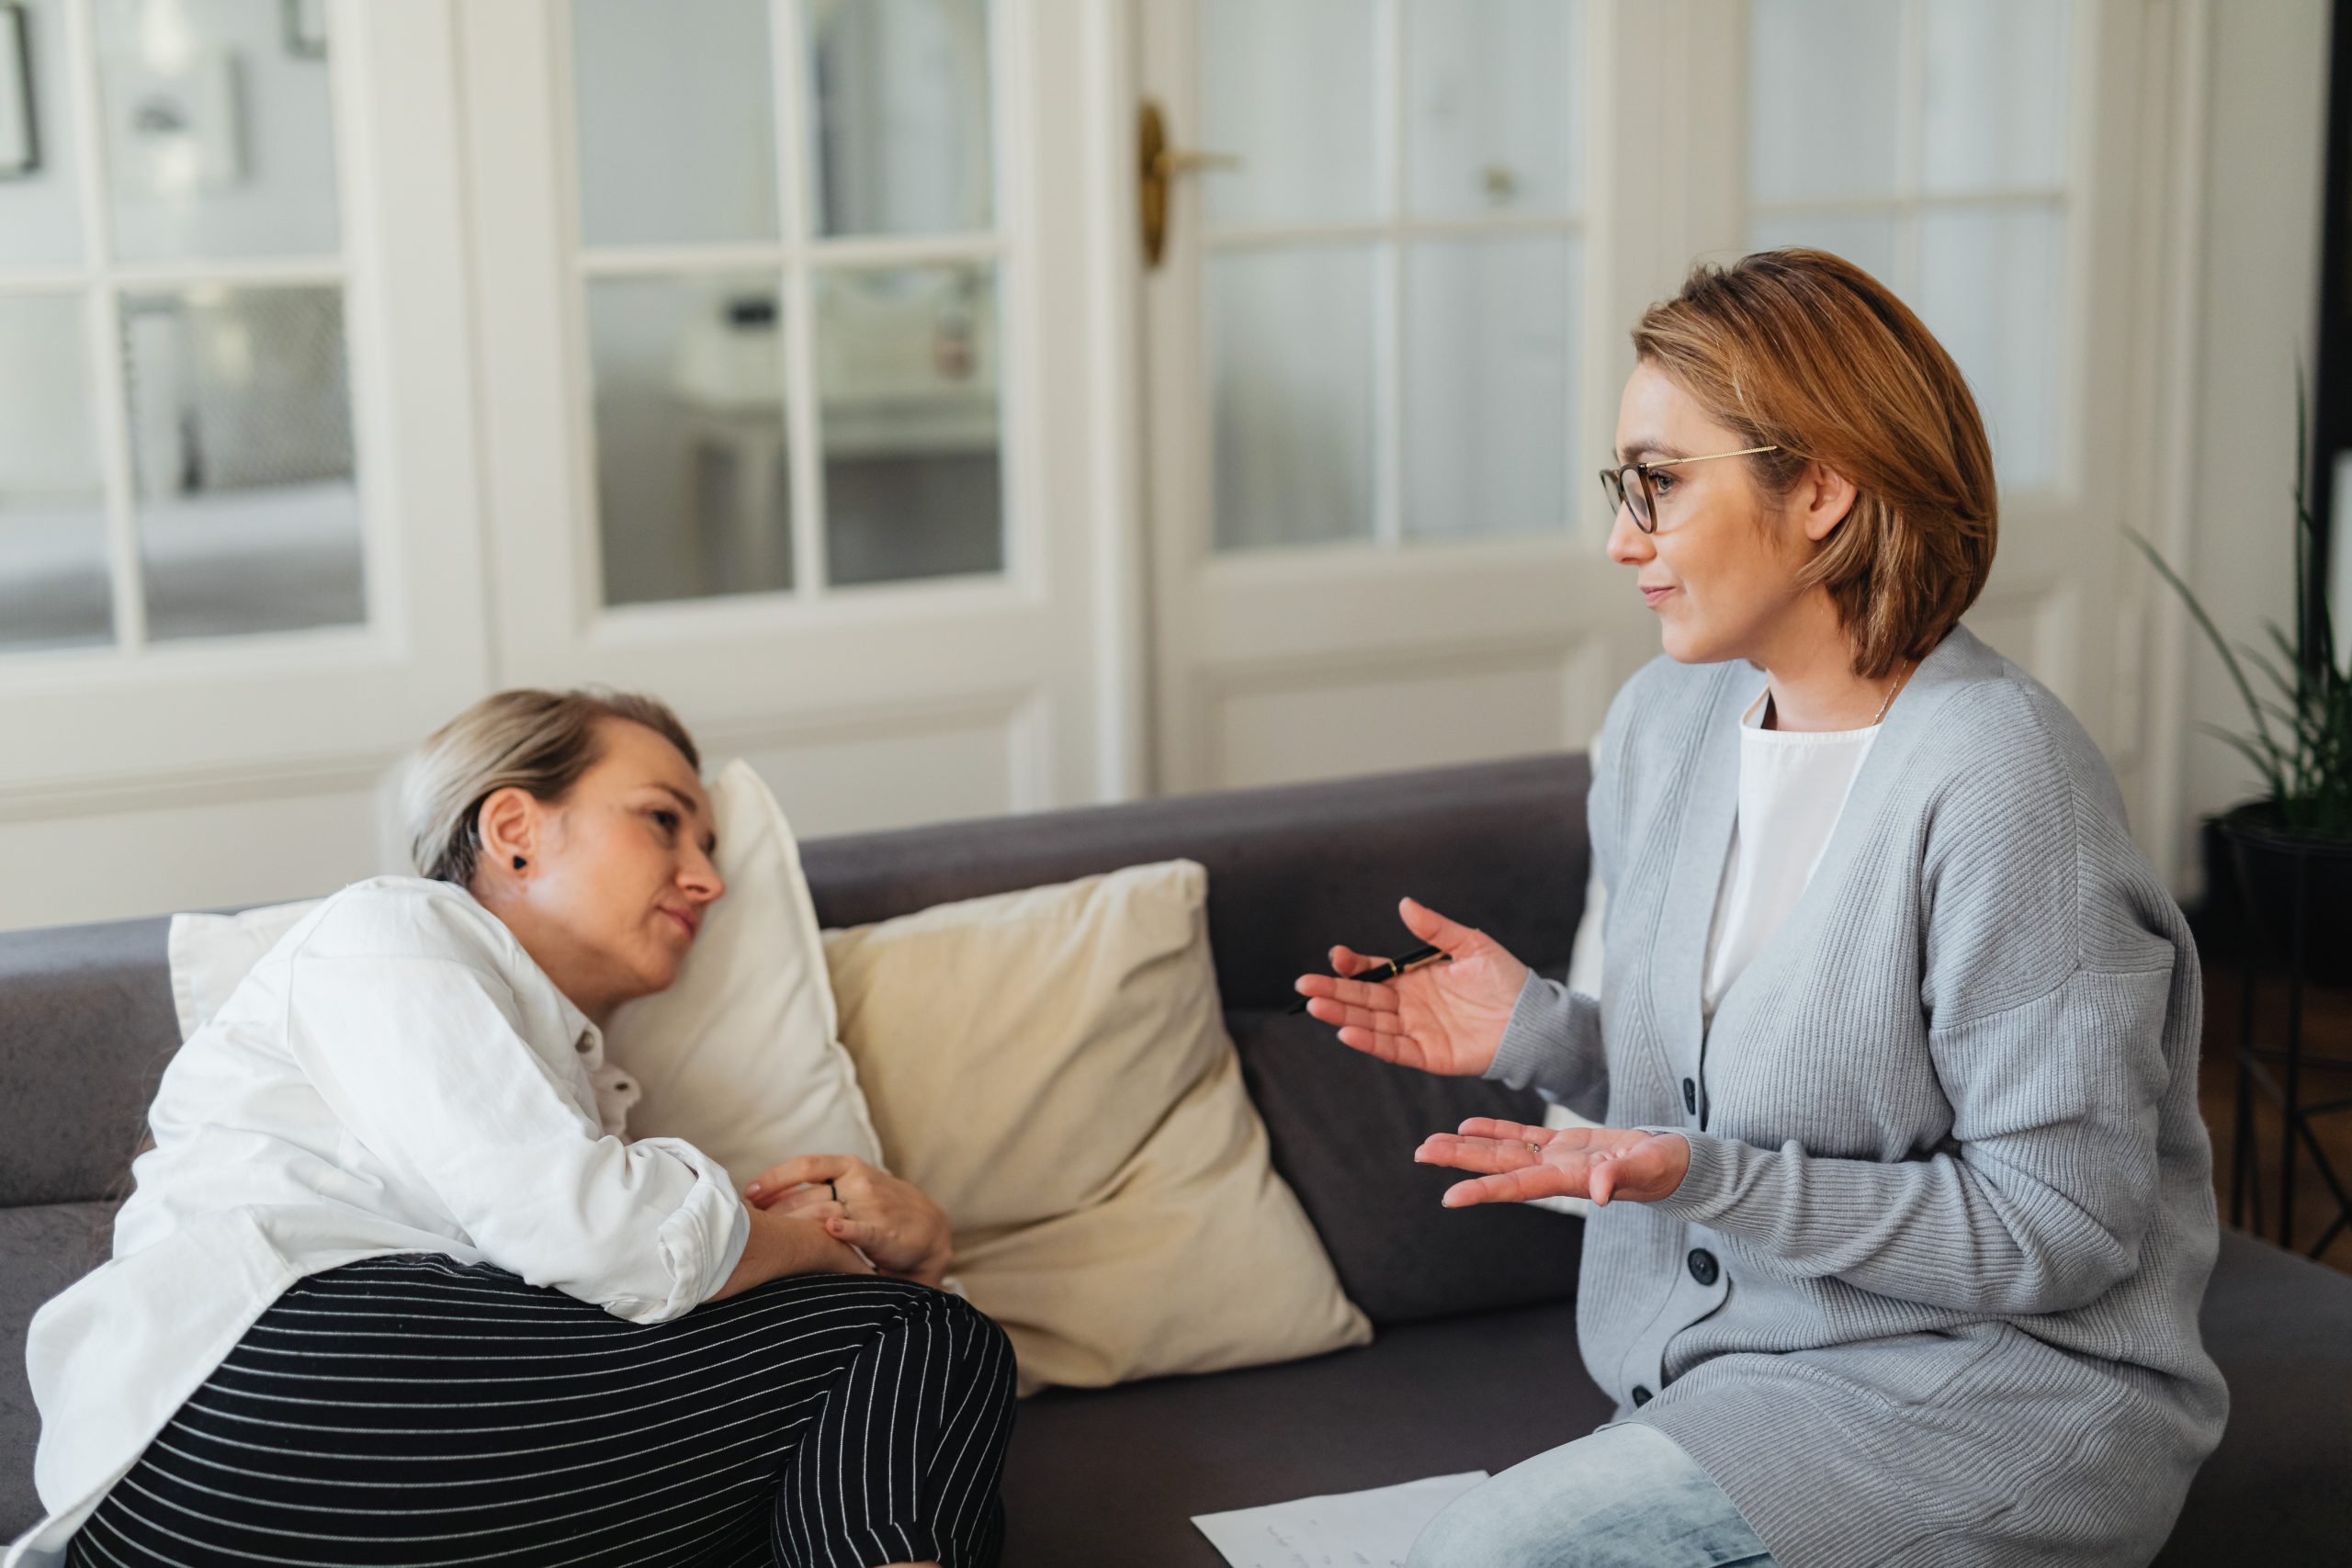 Support Worker talking with someone experiencing mental health issues